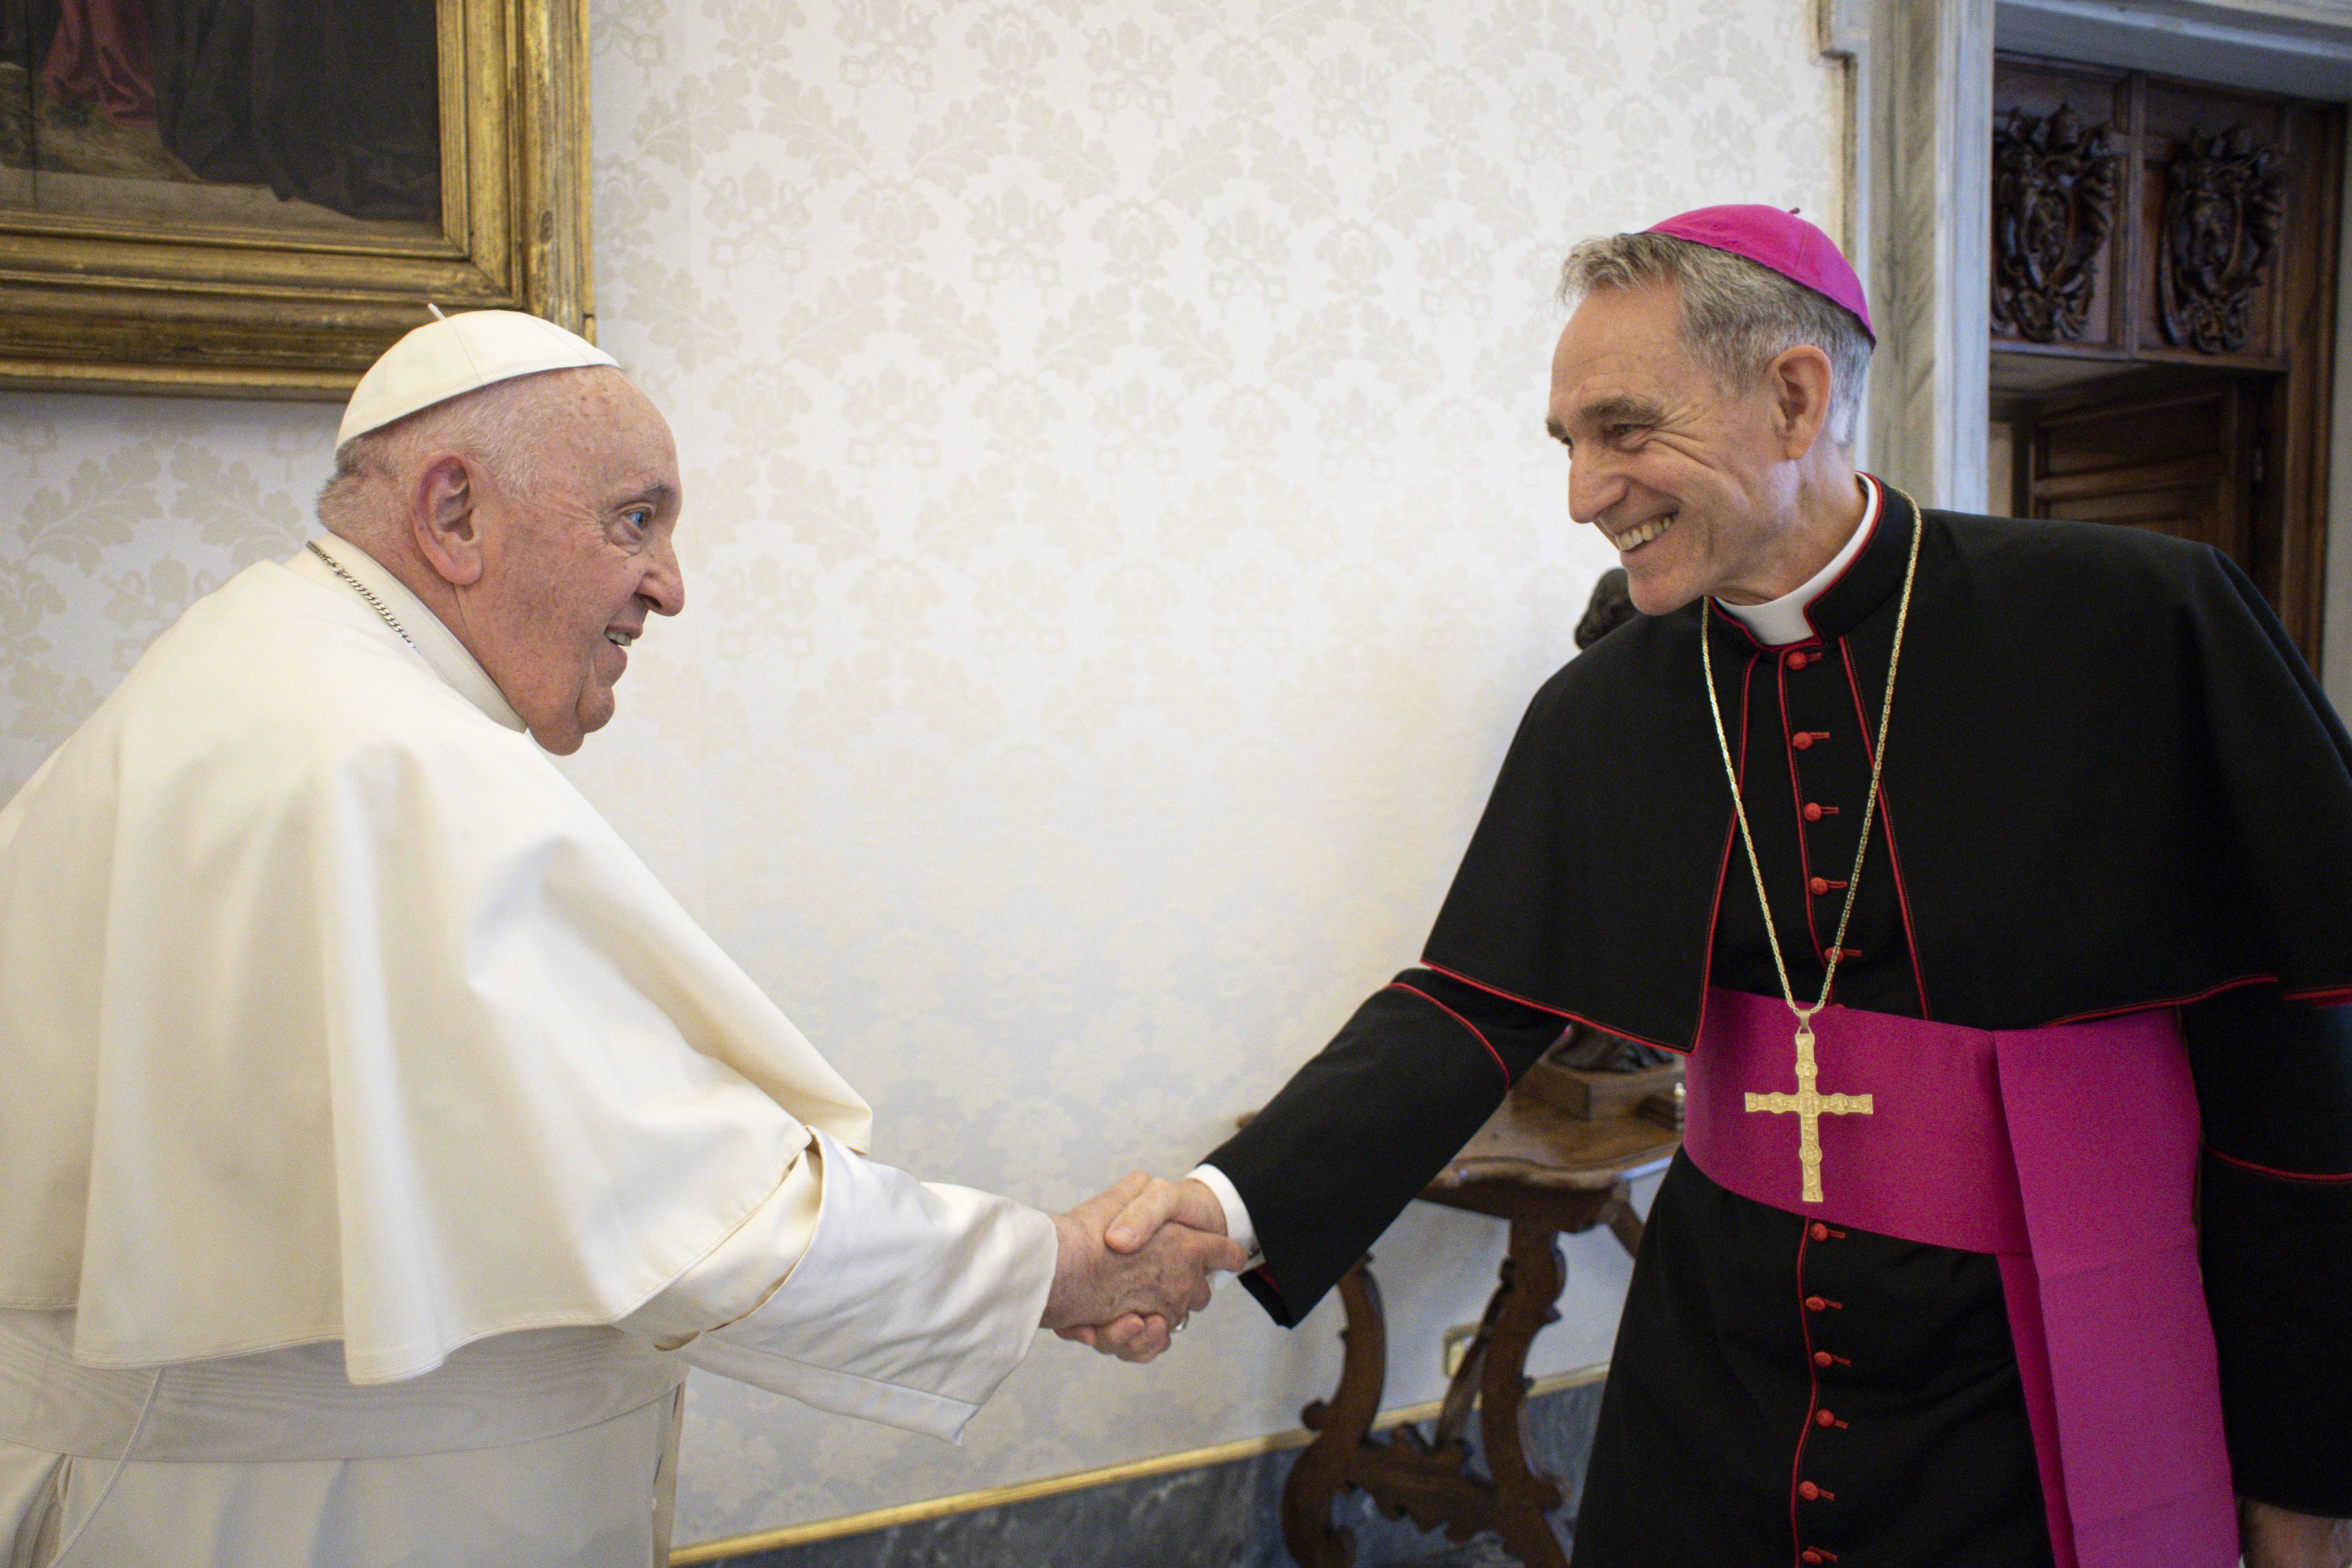 Pope Francis meets Archbishop Georg Gänswein, personal secretary to the late Pope Benedict XVI, in the library of the Apostolic Palace at the Vatican May 19, 2023. Although he still has the title of prefect of the papal household, Archbishop Gänswein has not worked in the office since 2020 and is awaiting a new assignment. (CNS photo/Vatican Media)